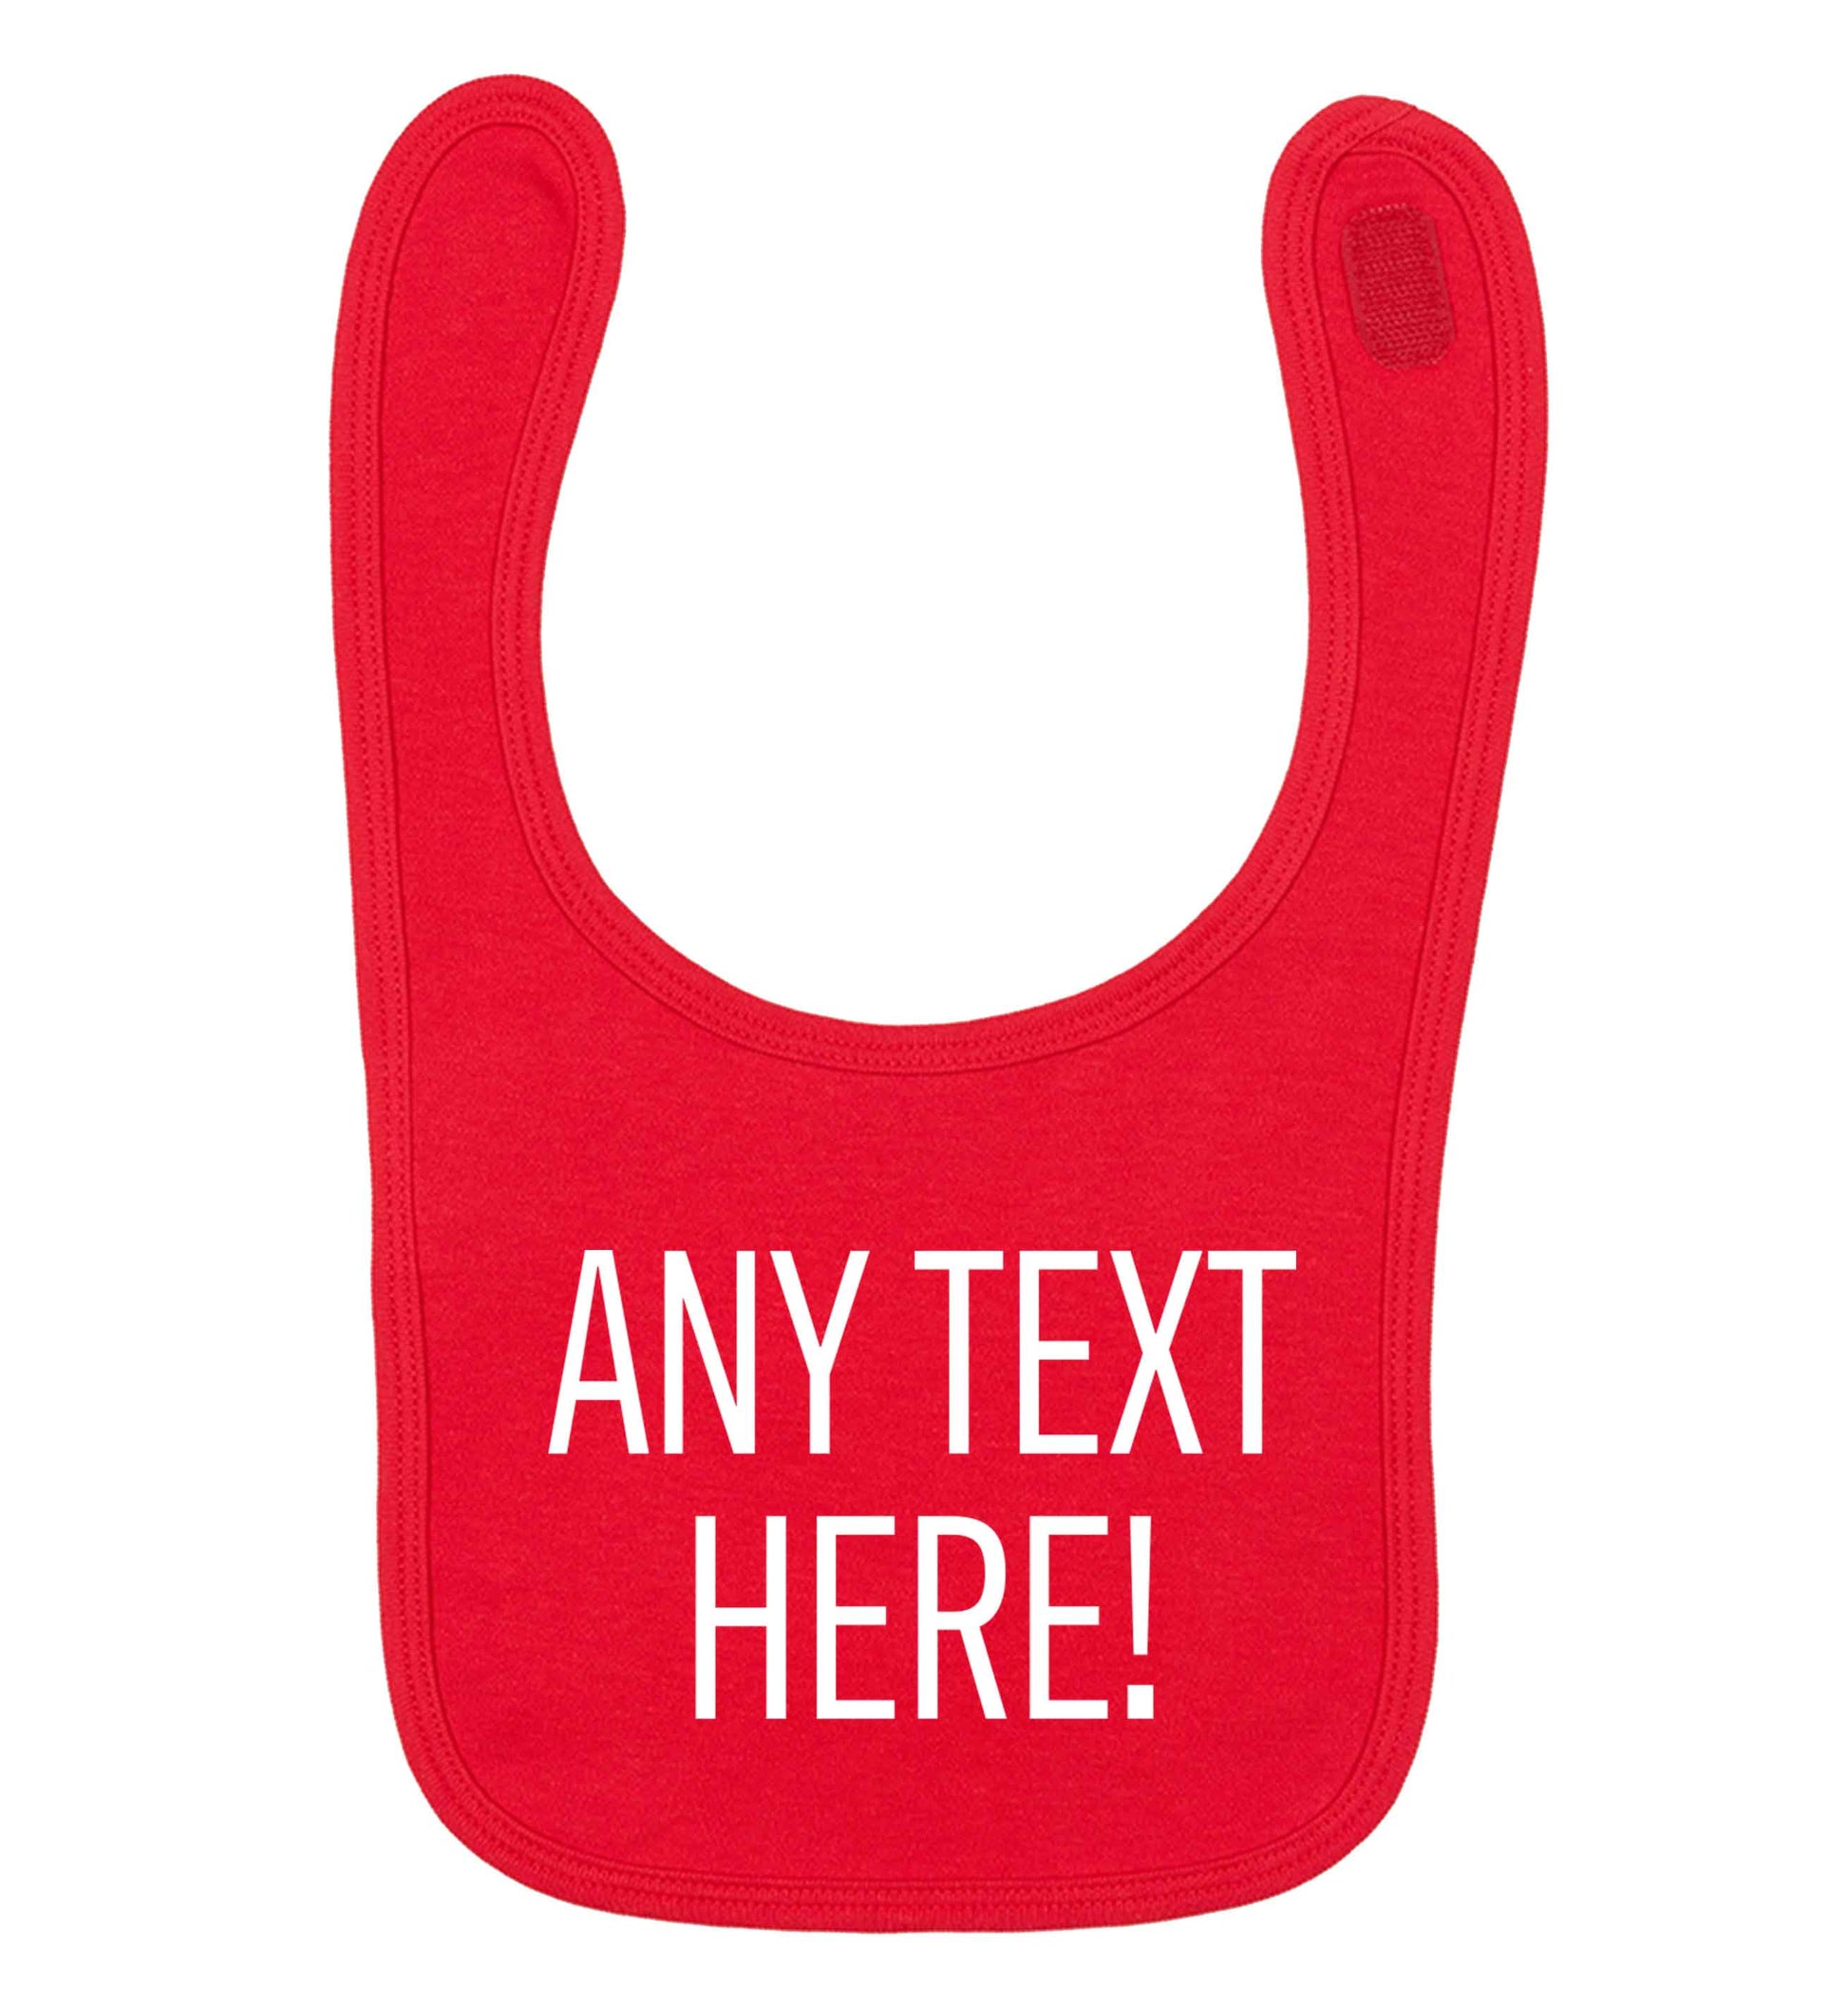 Any text here red baby bib